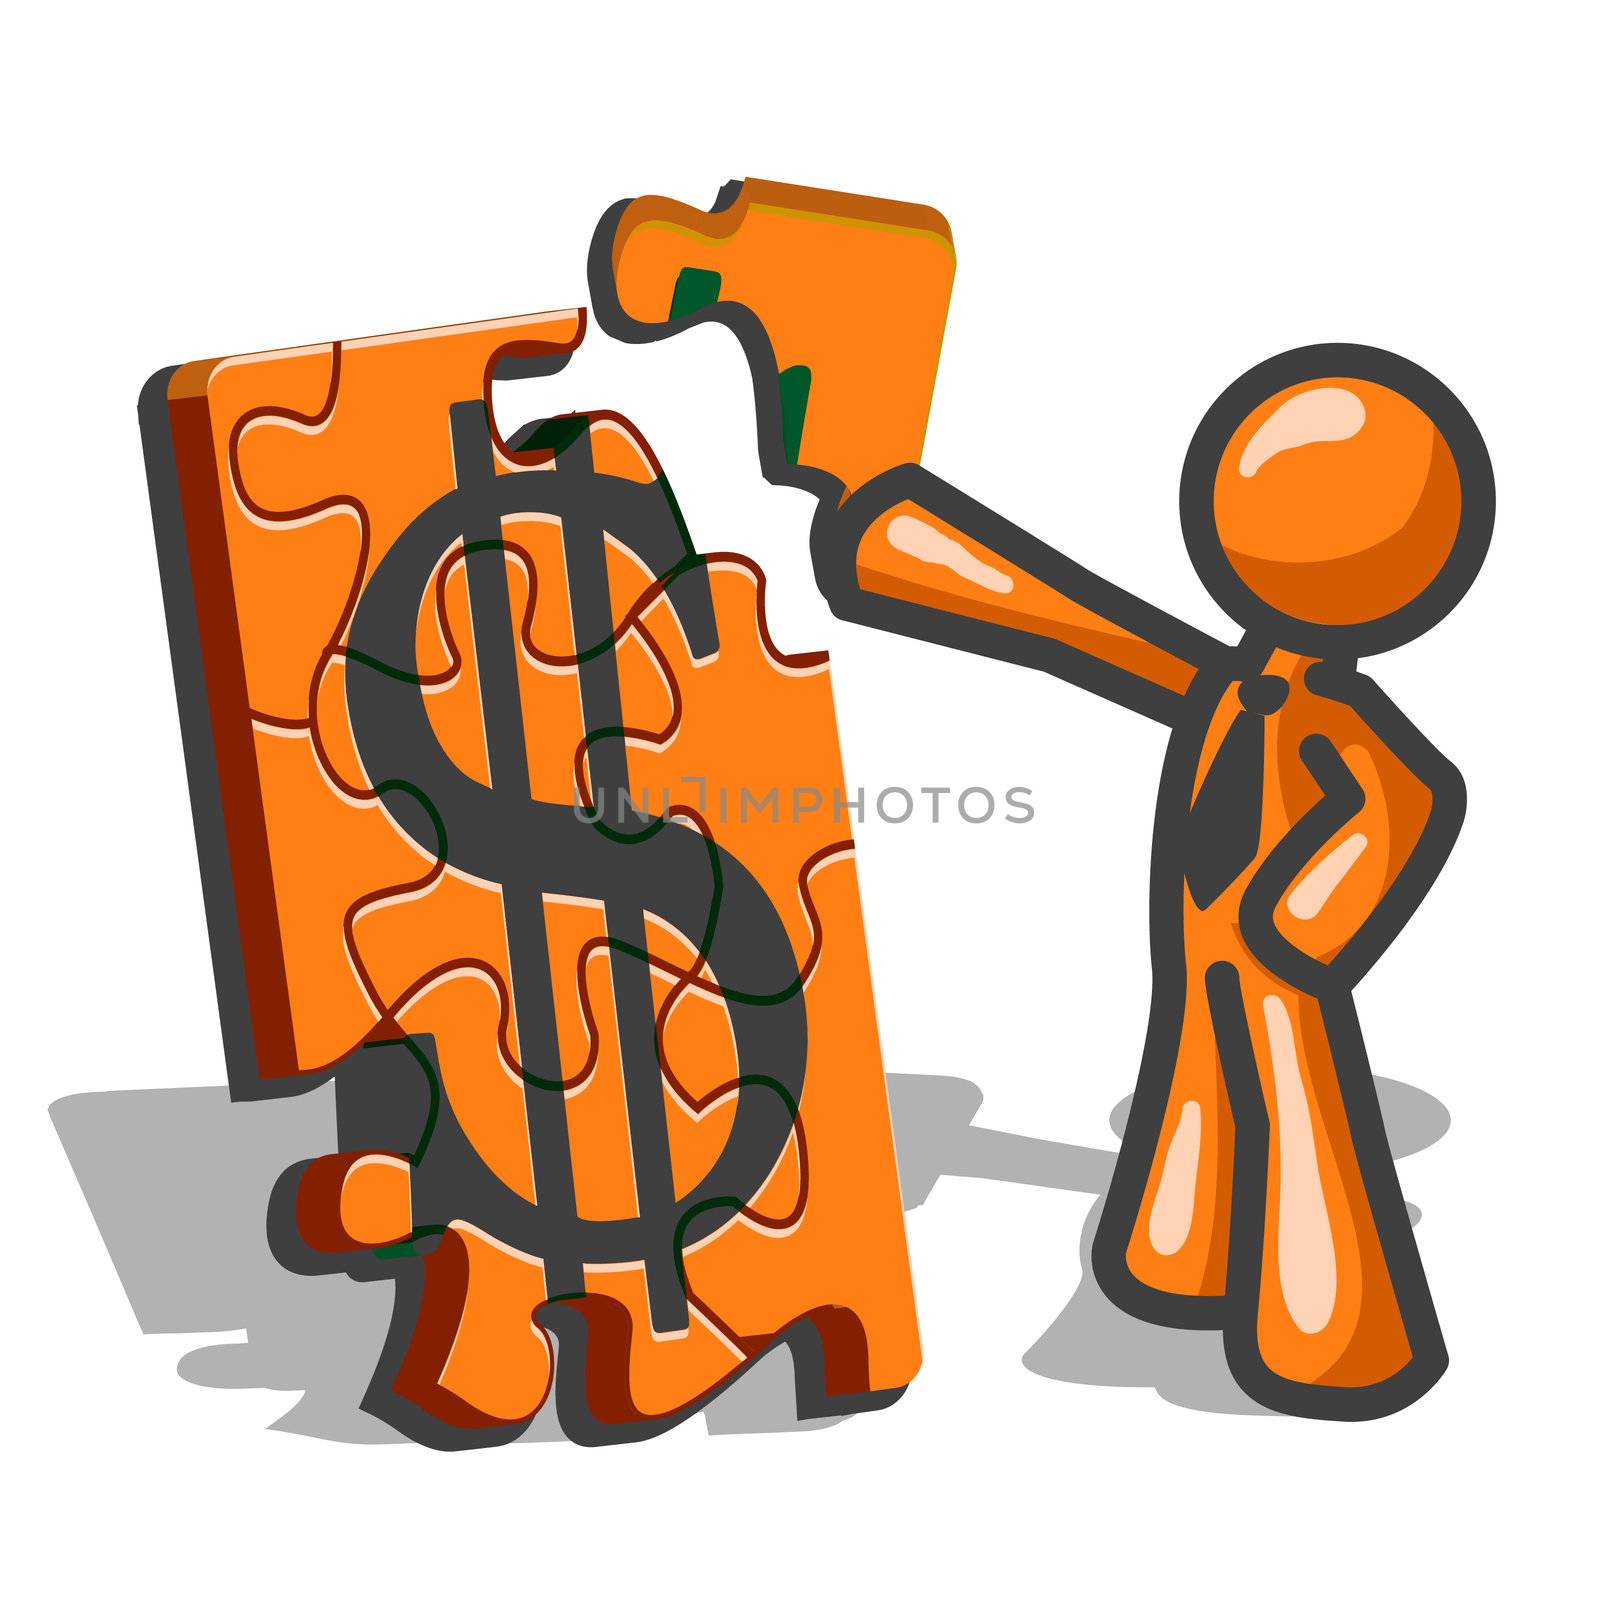 An orange man assembling a large puzzle with a dollar sign on it, showing the nature of budgeting or financial planning. 